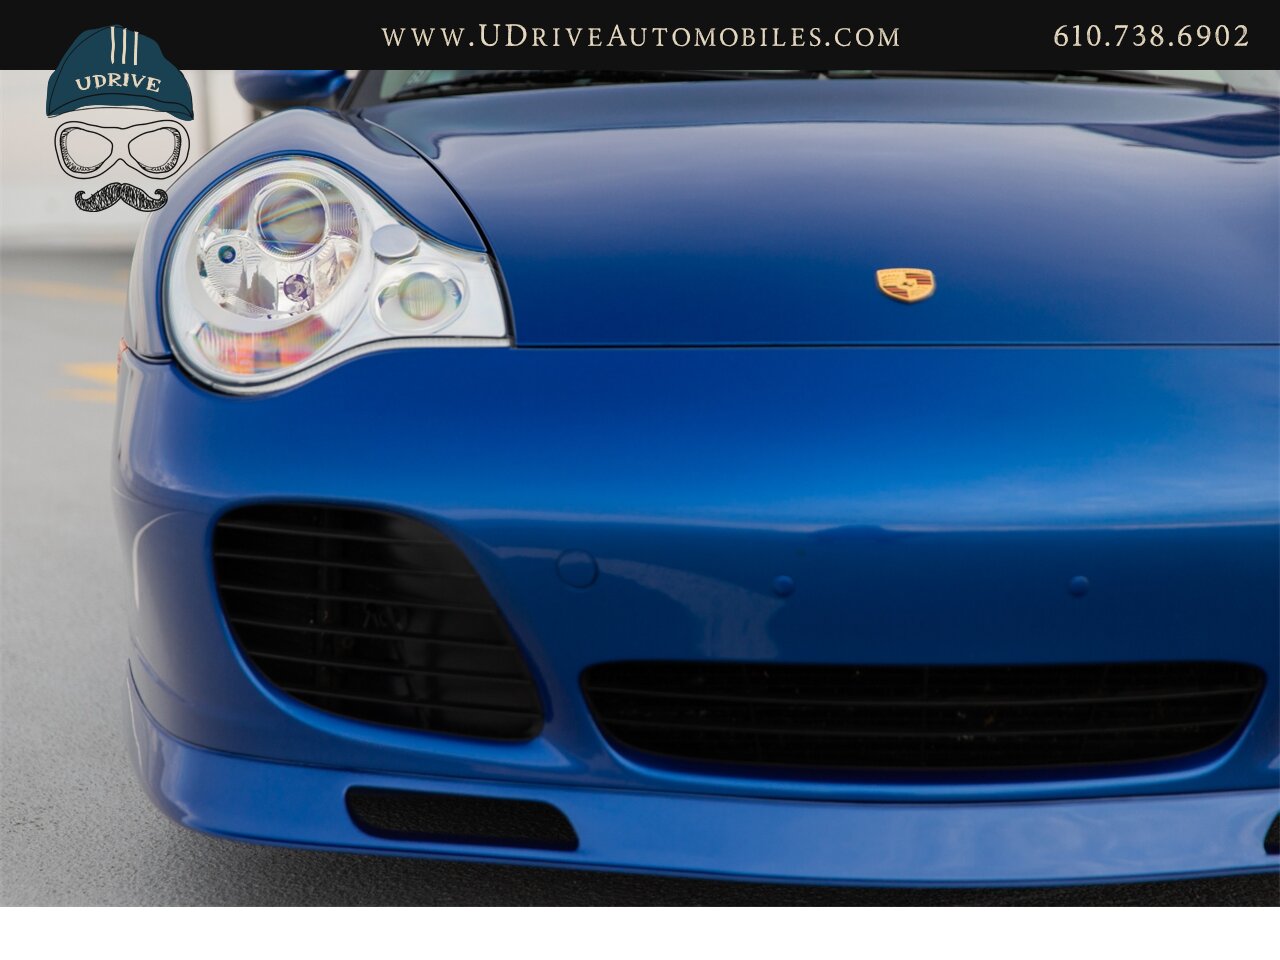 2005 Porsche 911 Turbo S Factory Aerokit Extremely Rare Cobalt Blue  Yellow Deviating Stitching 1 of a Kind Spec $160k MSRP - Photo 15 - West Chester, PA 19382